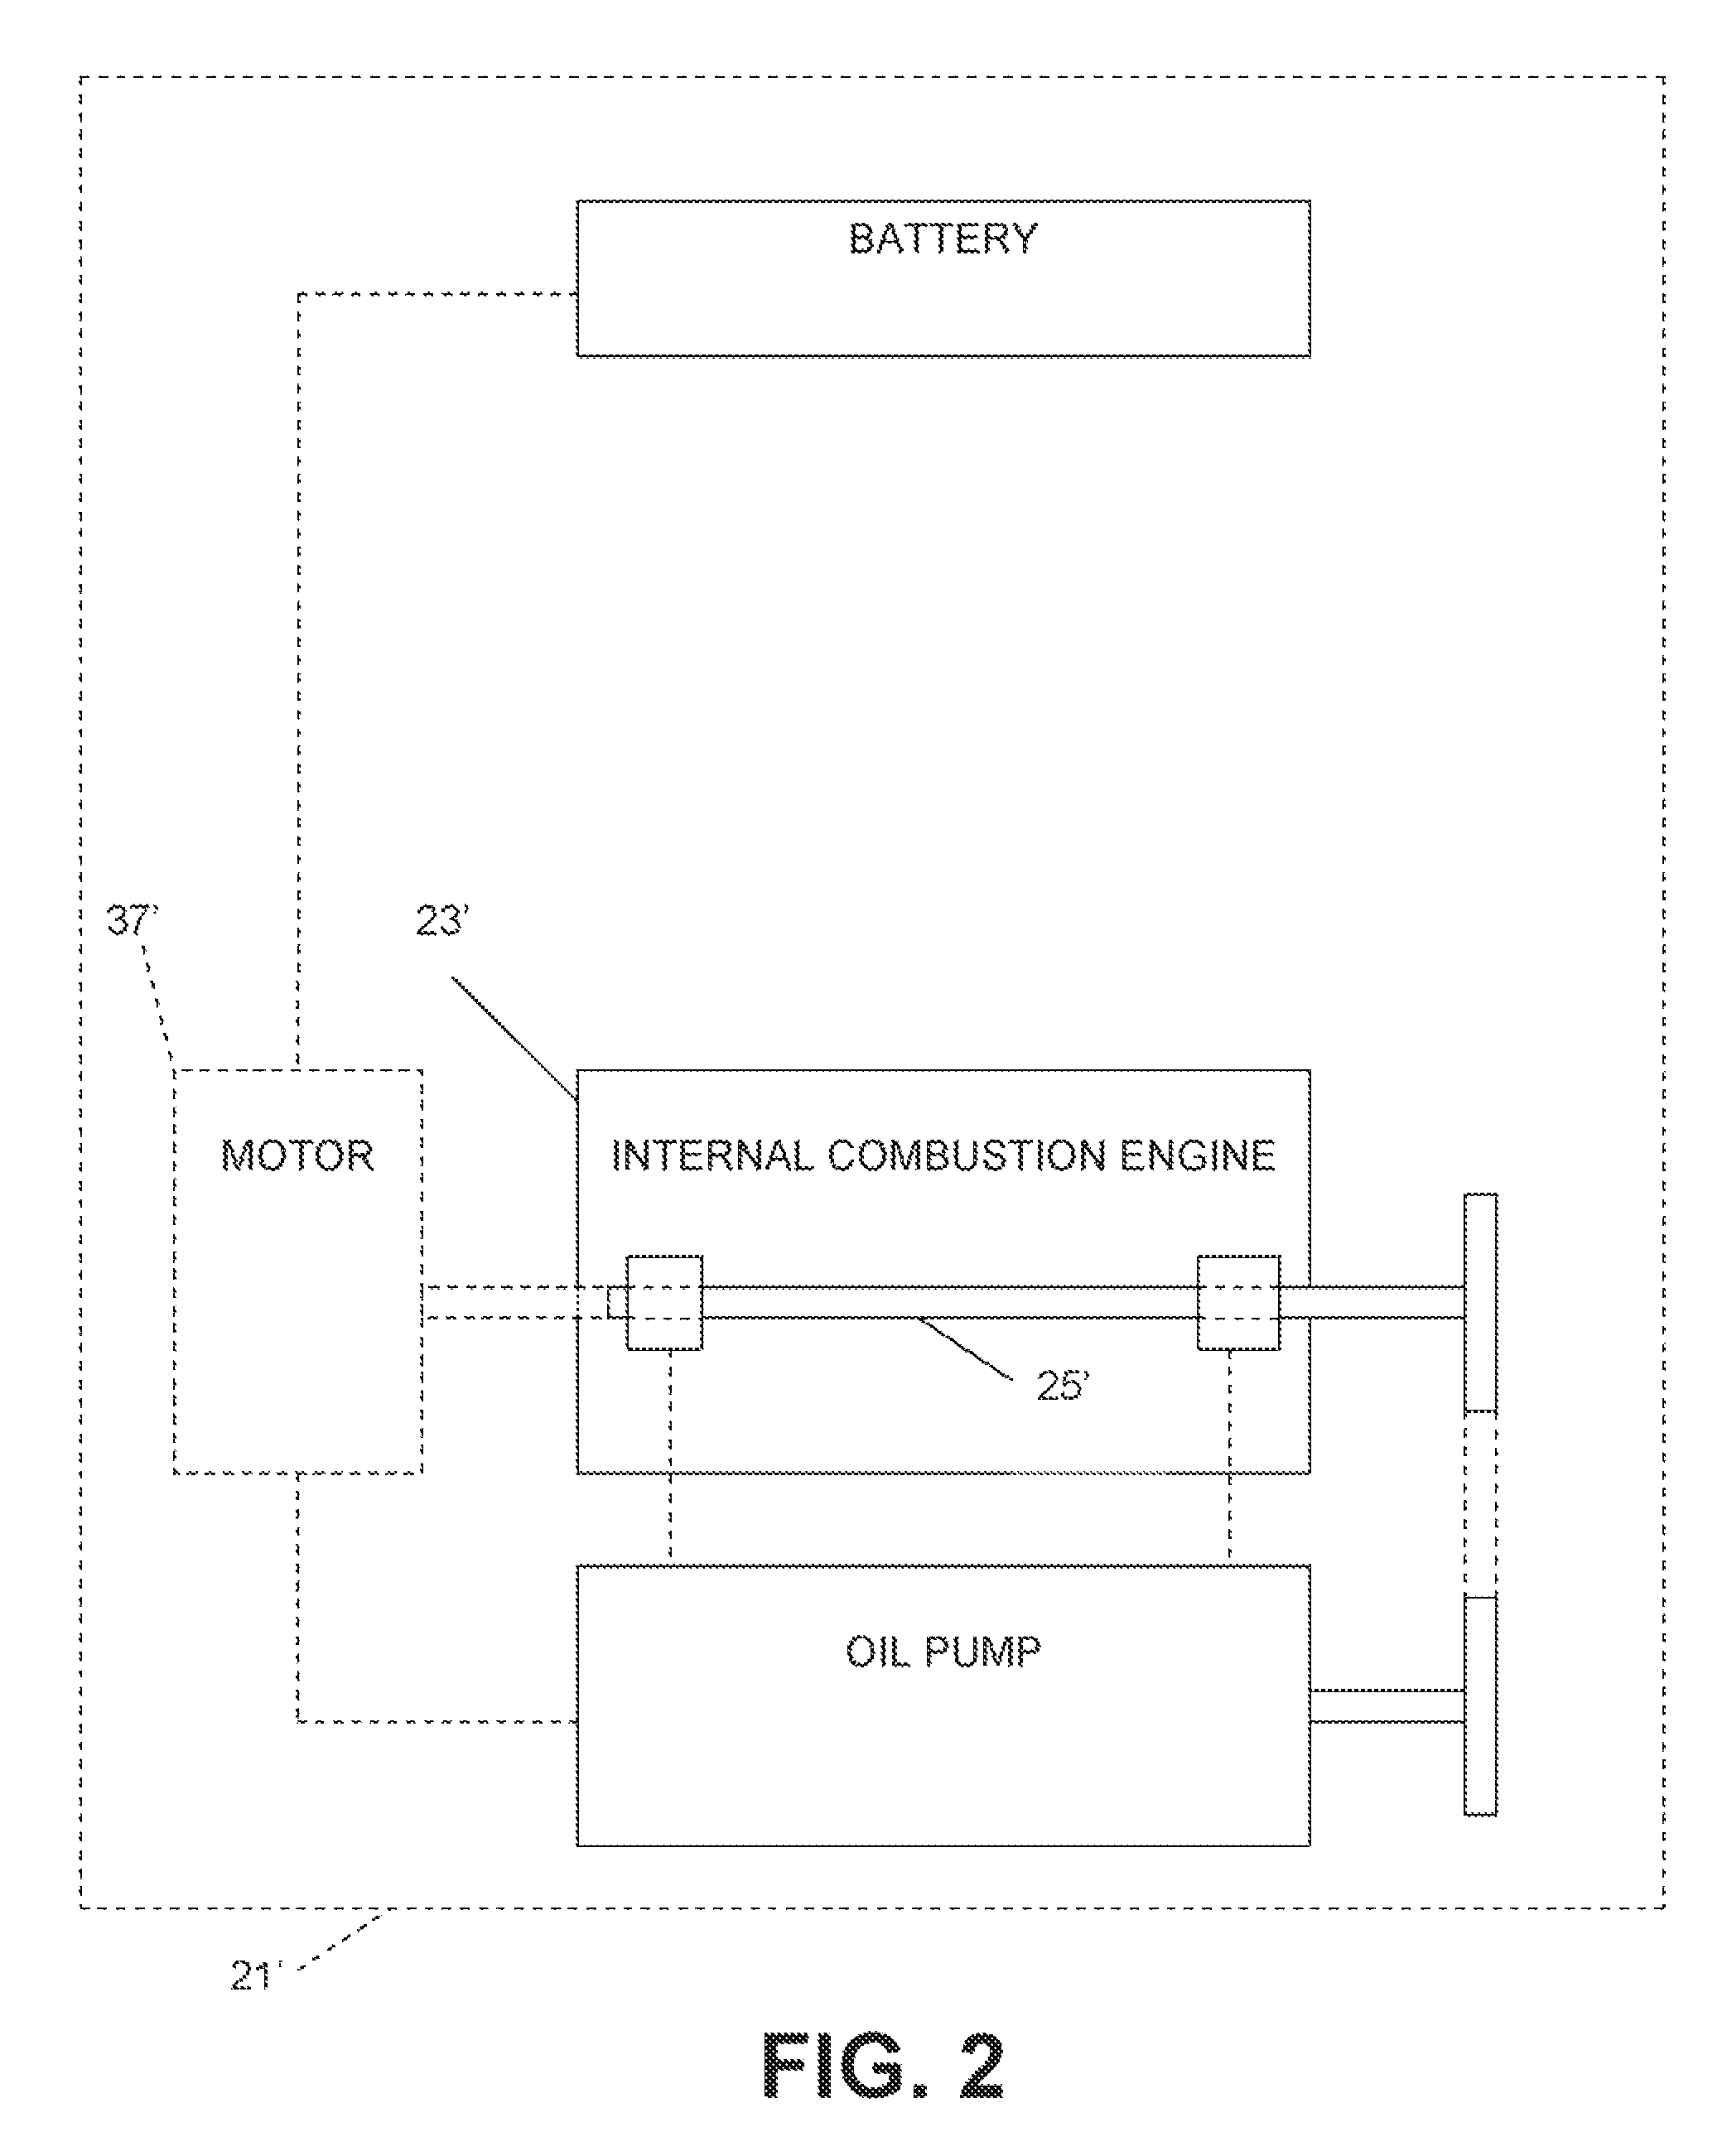 Internal combustion engine including crankshaft that is rotated while engine is in a non-fueled mode and method of operating an engine